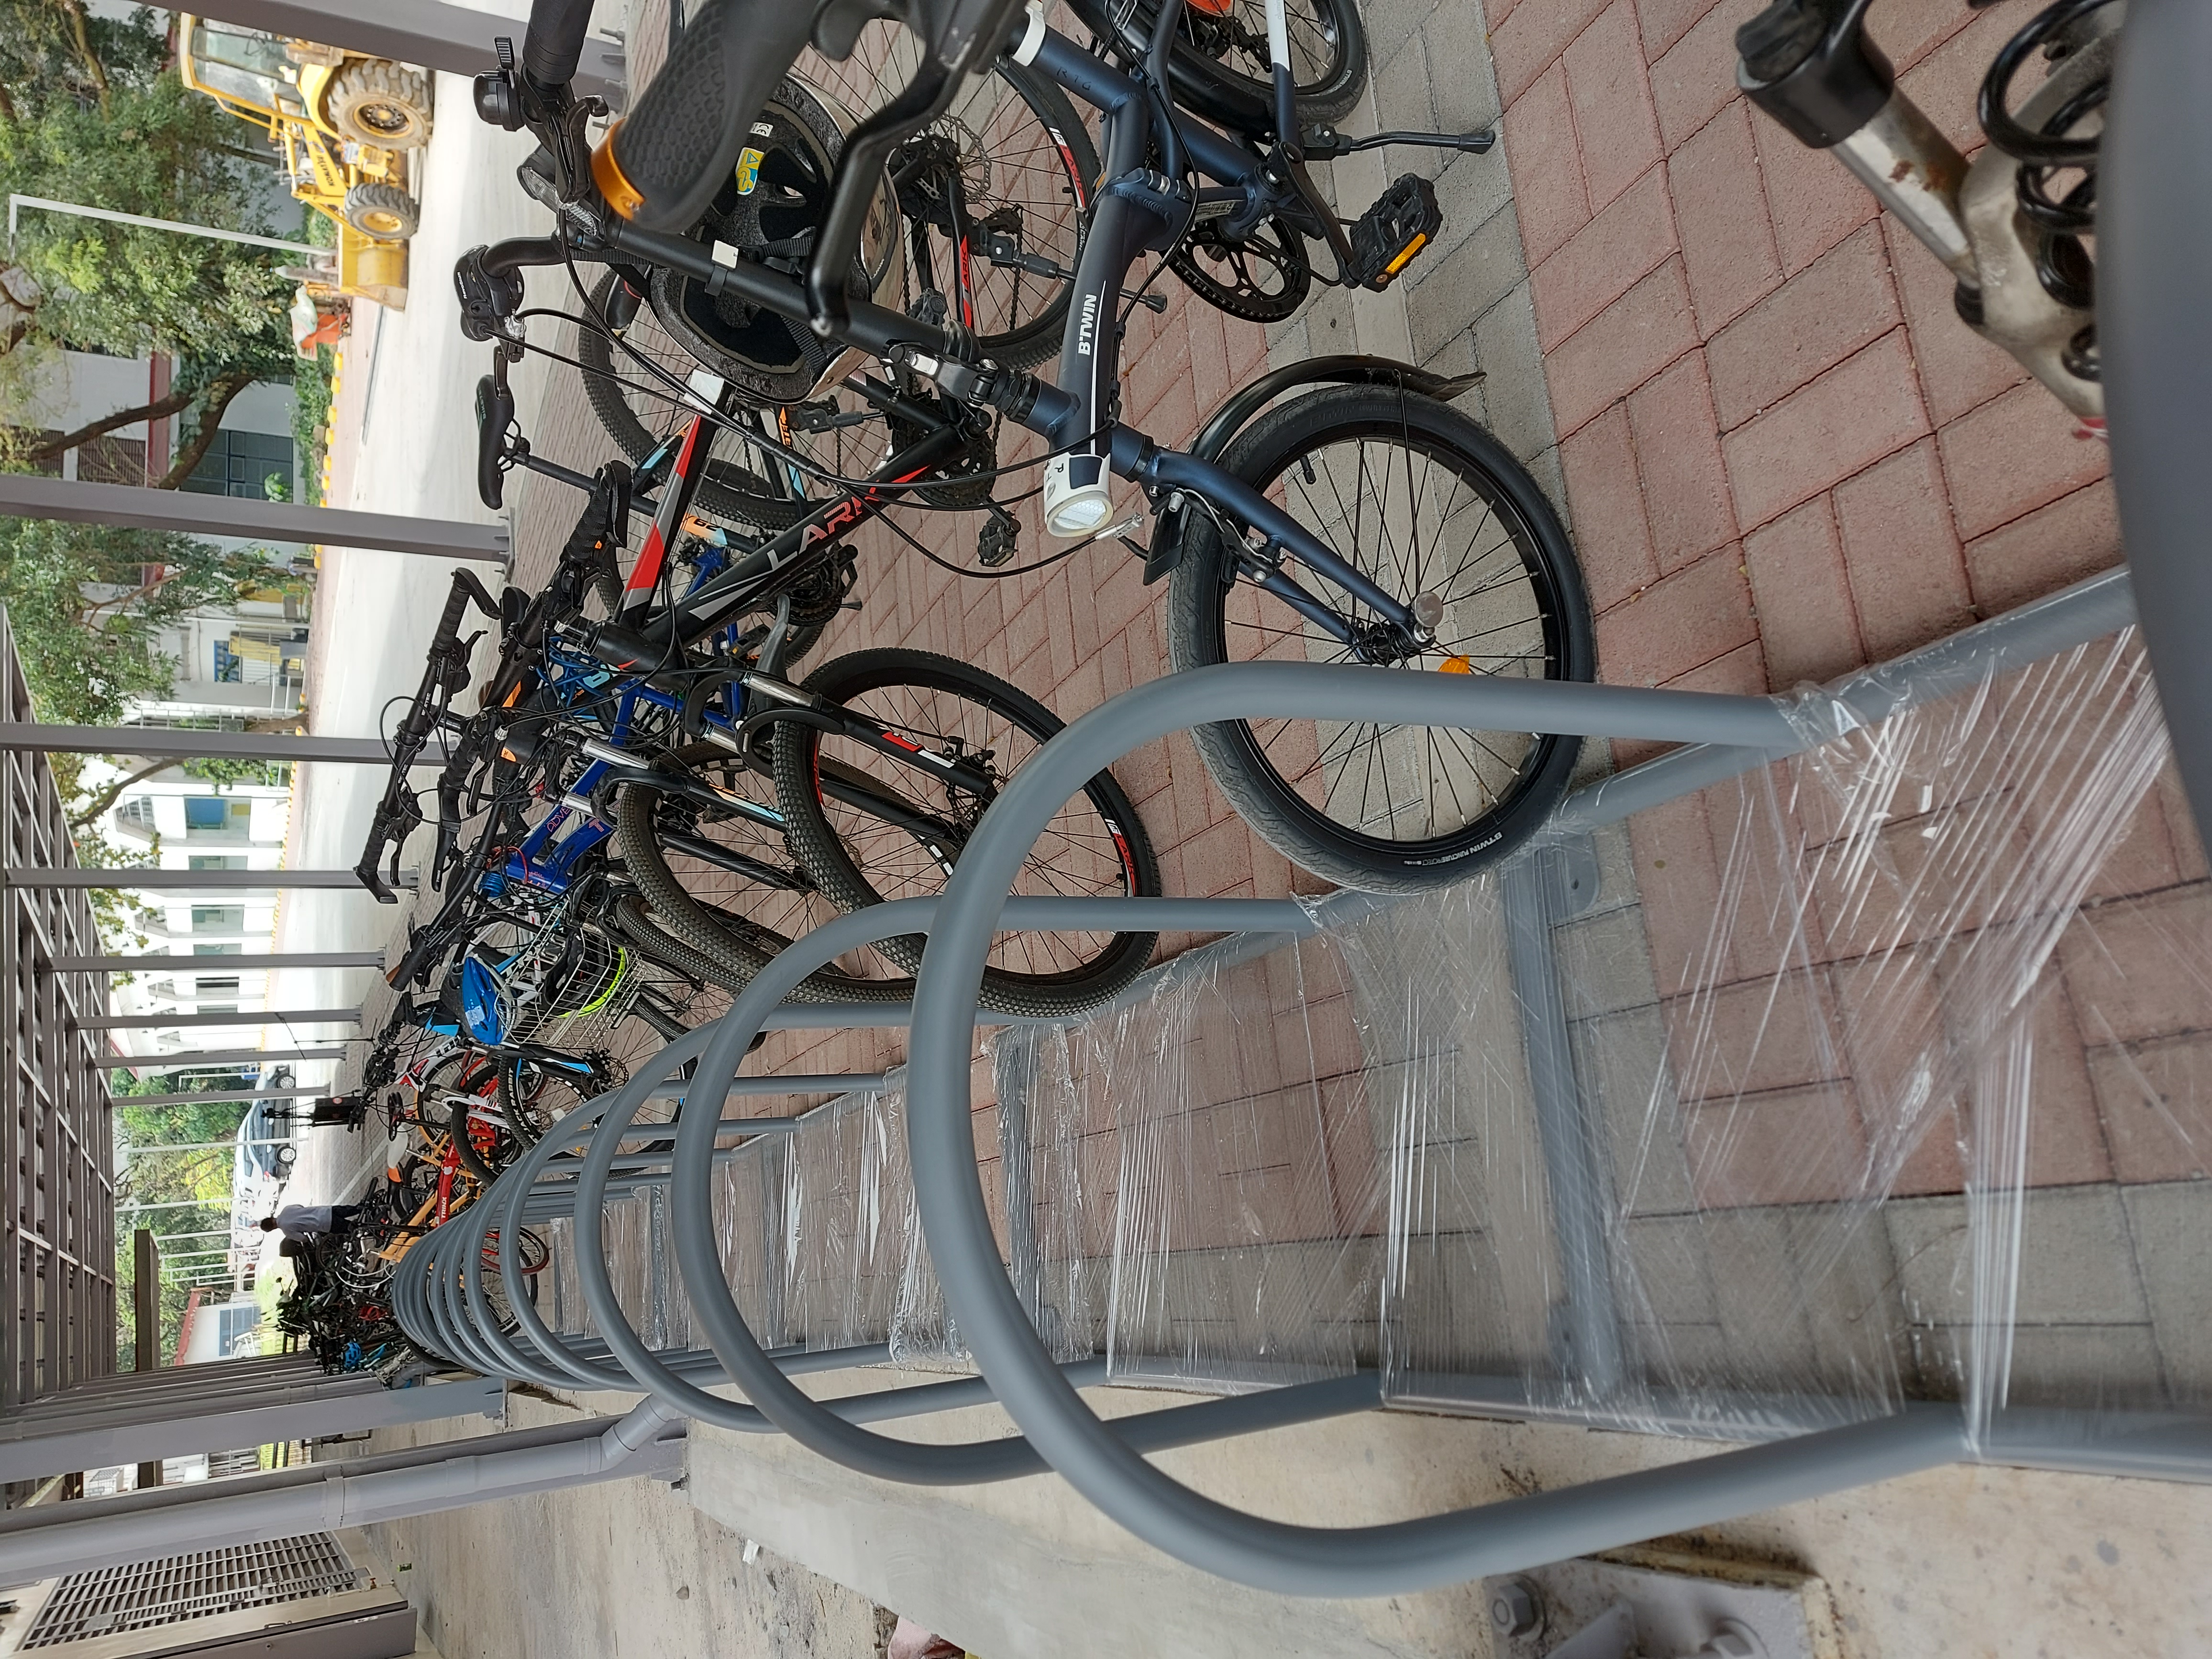 The four new racks can secure up to 48 bicycles in all.